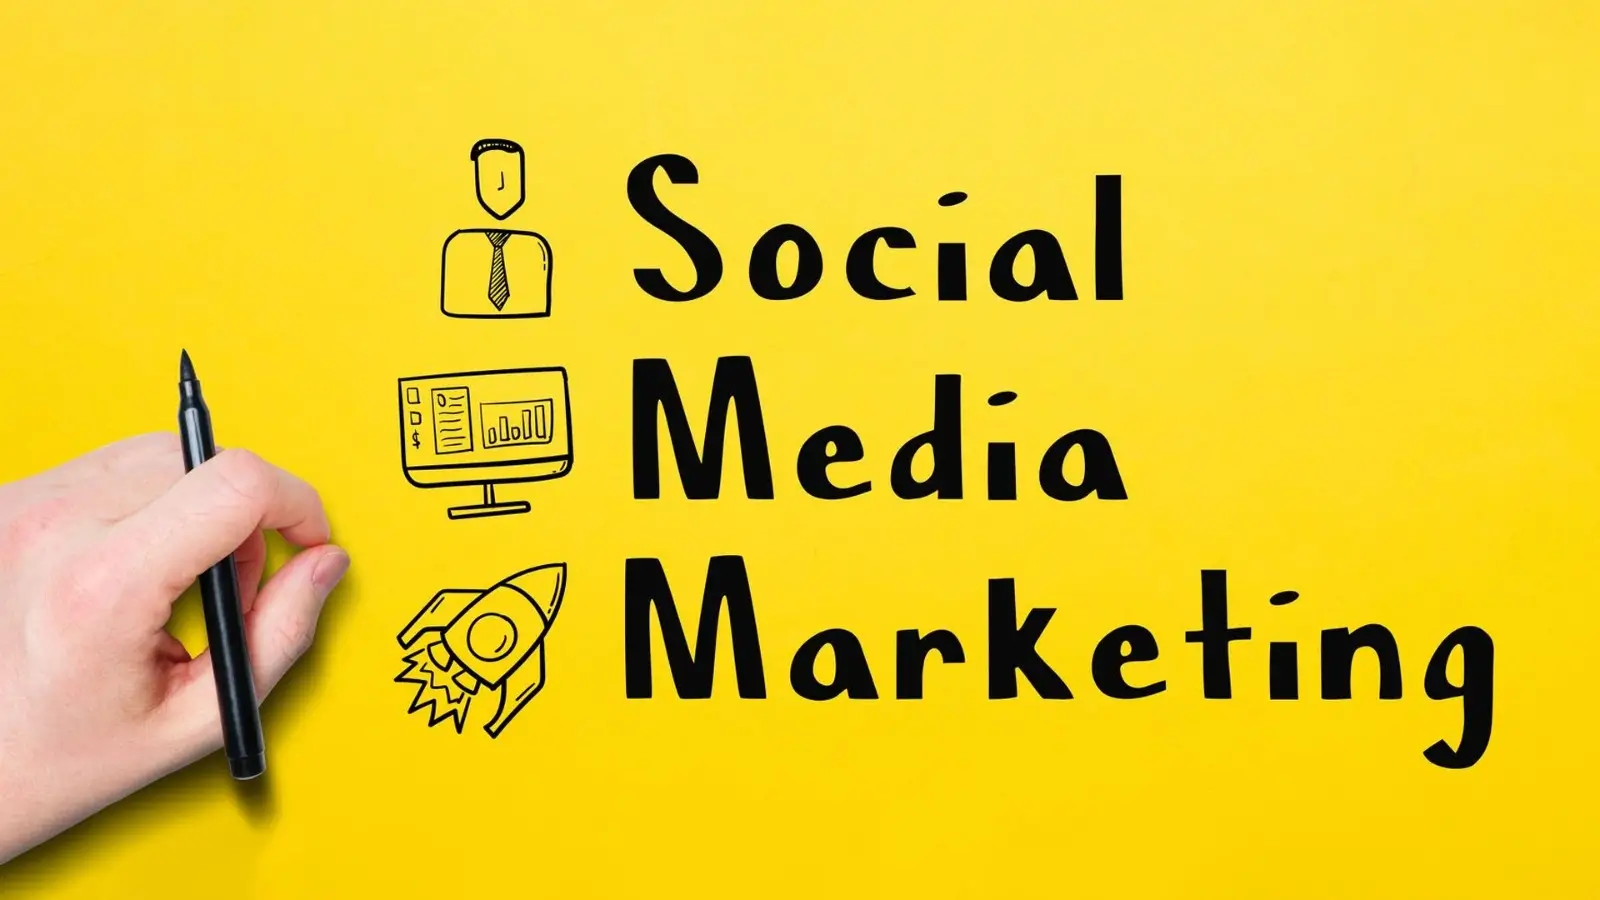 How To Create a Social Media Marketing Strategy: 10 Steps to Success (2023)